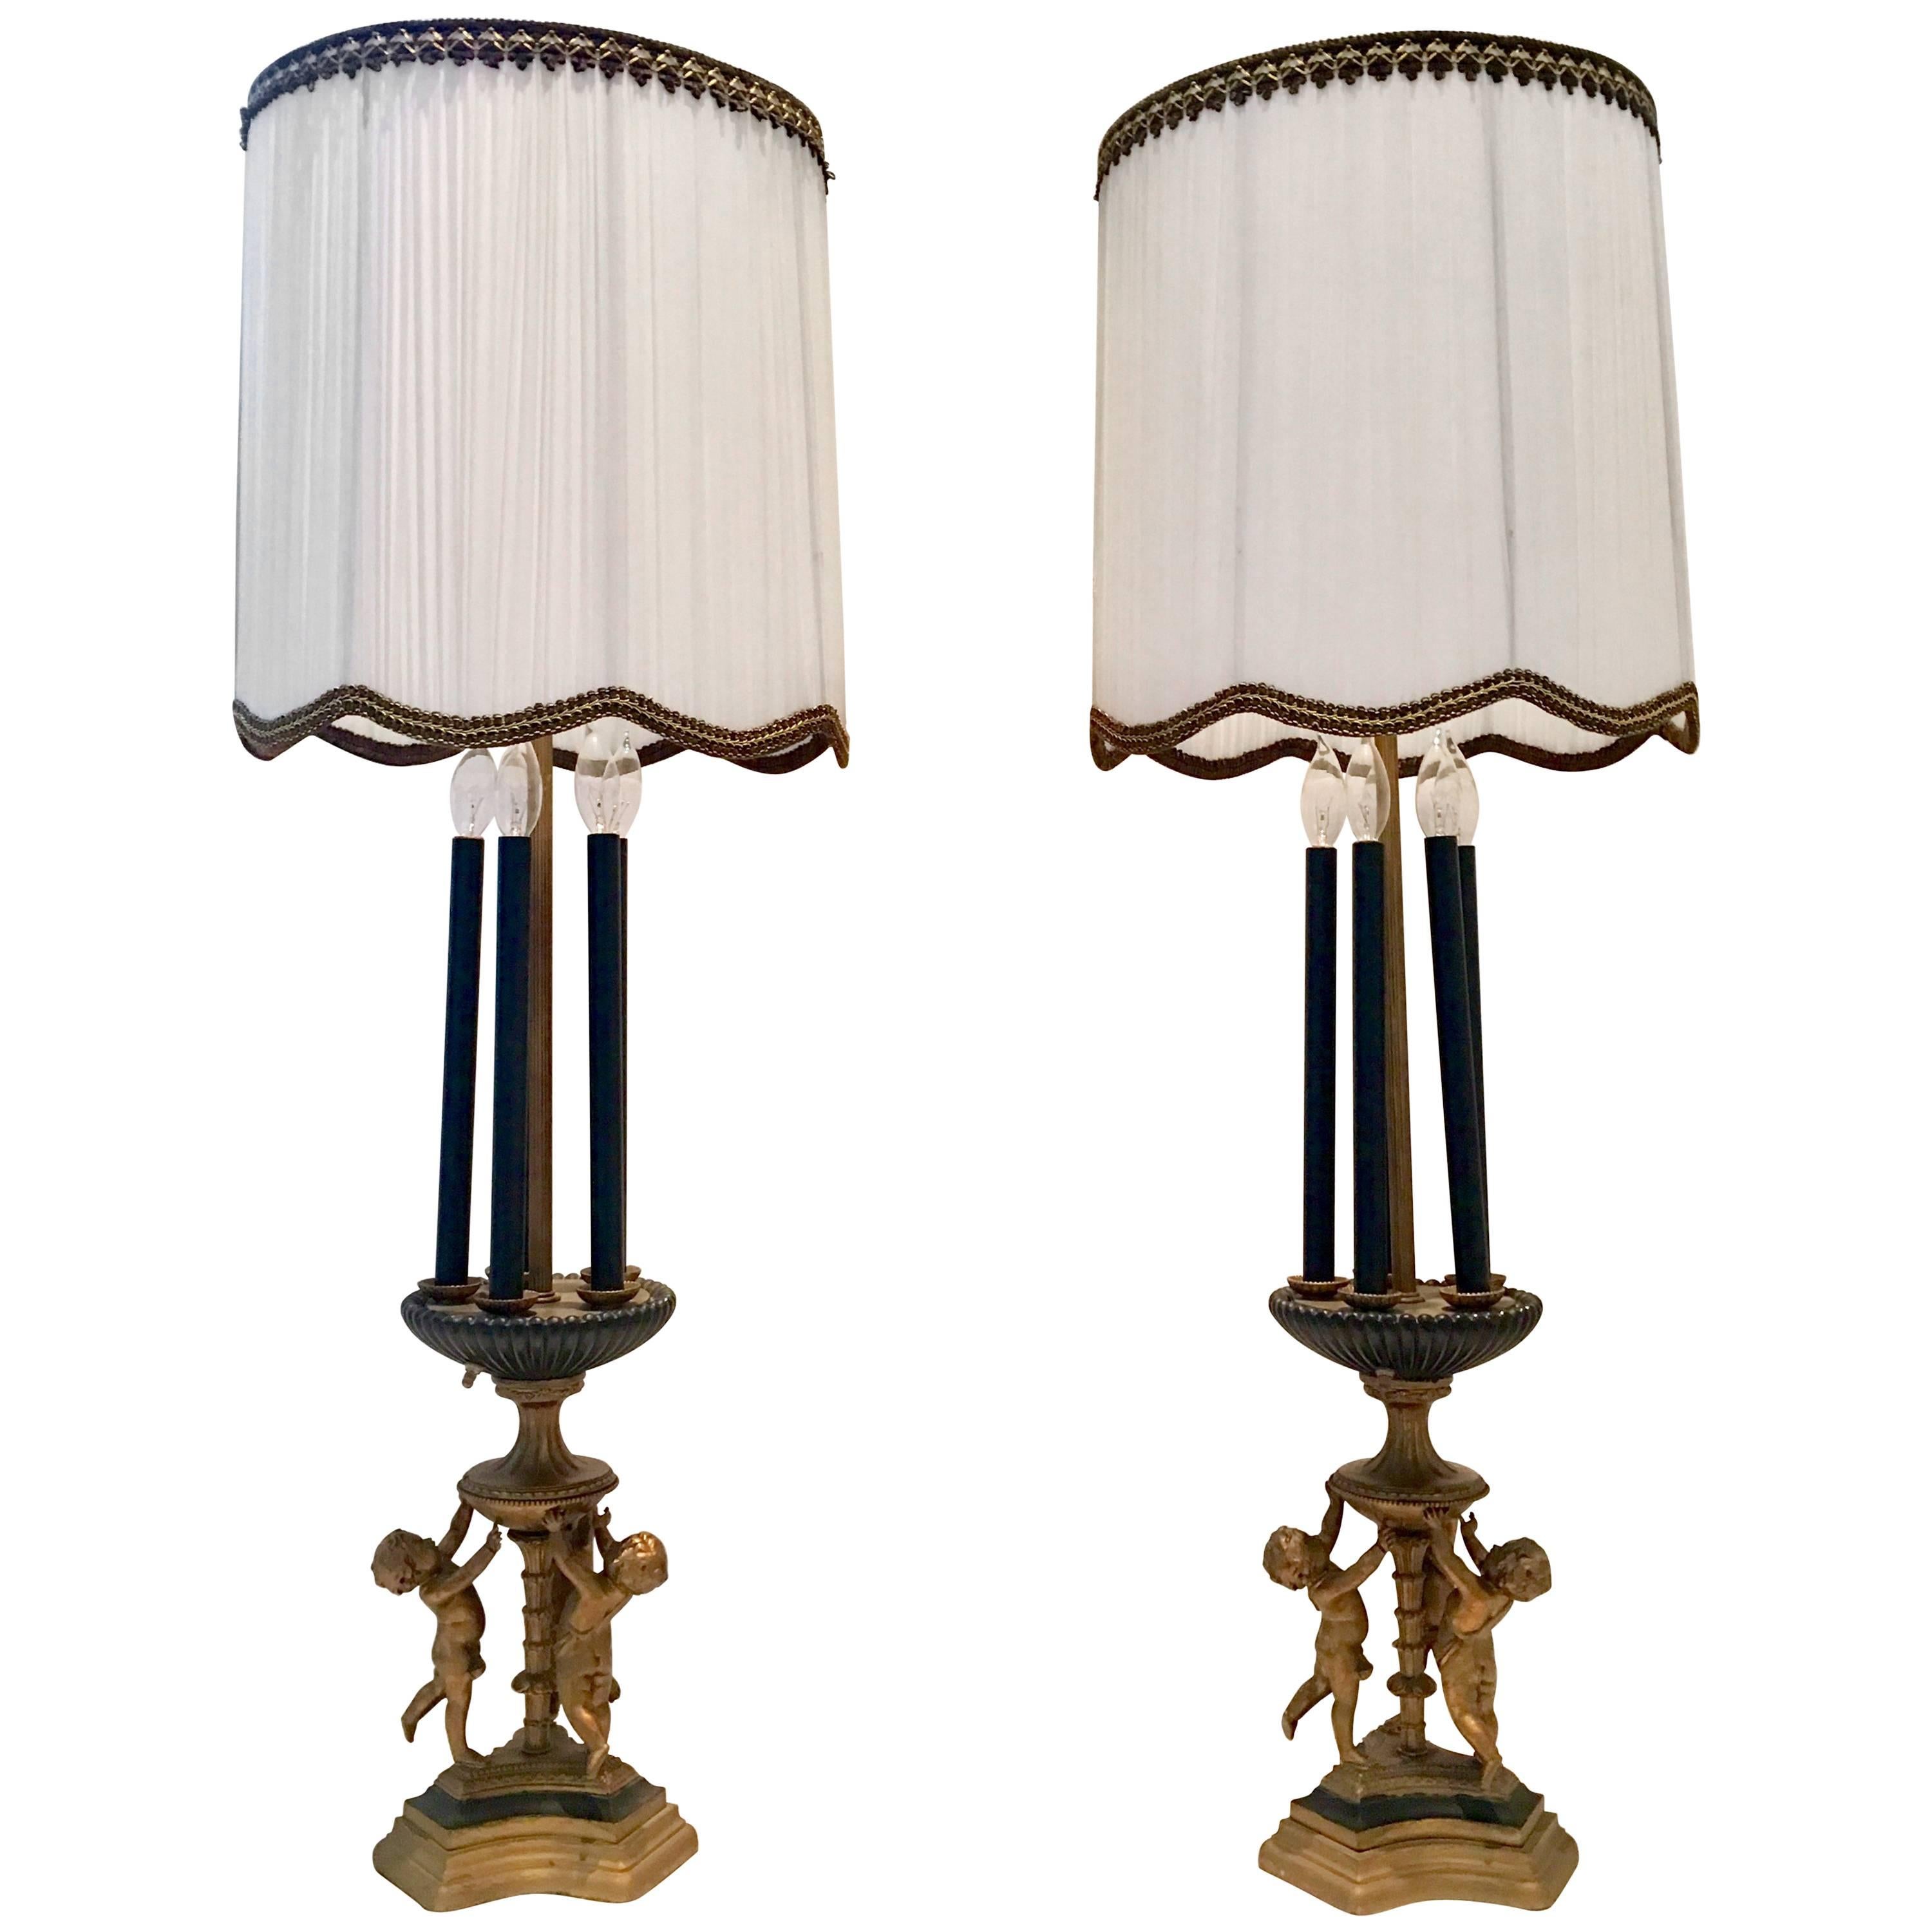 Antique Monumental Pair Of Neoclassical Six-Light Candelabra Lamps & Shades